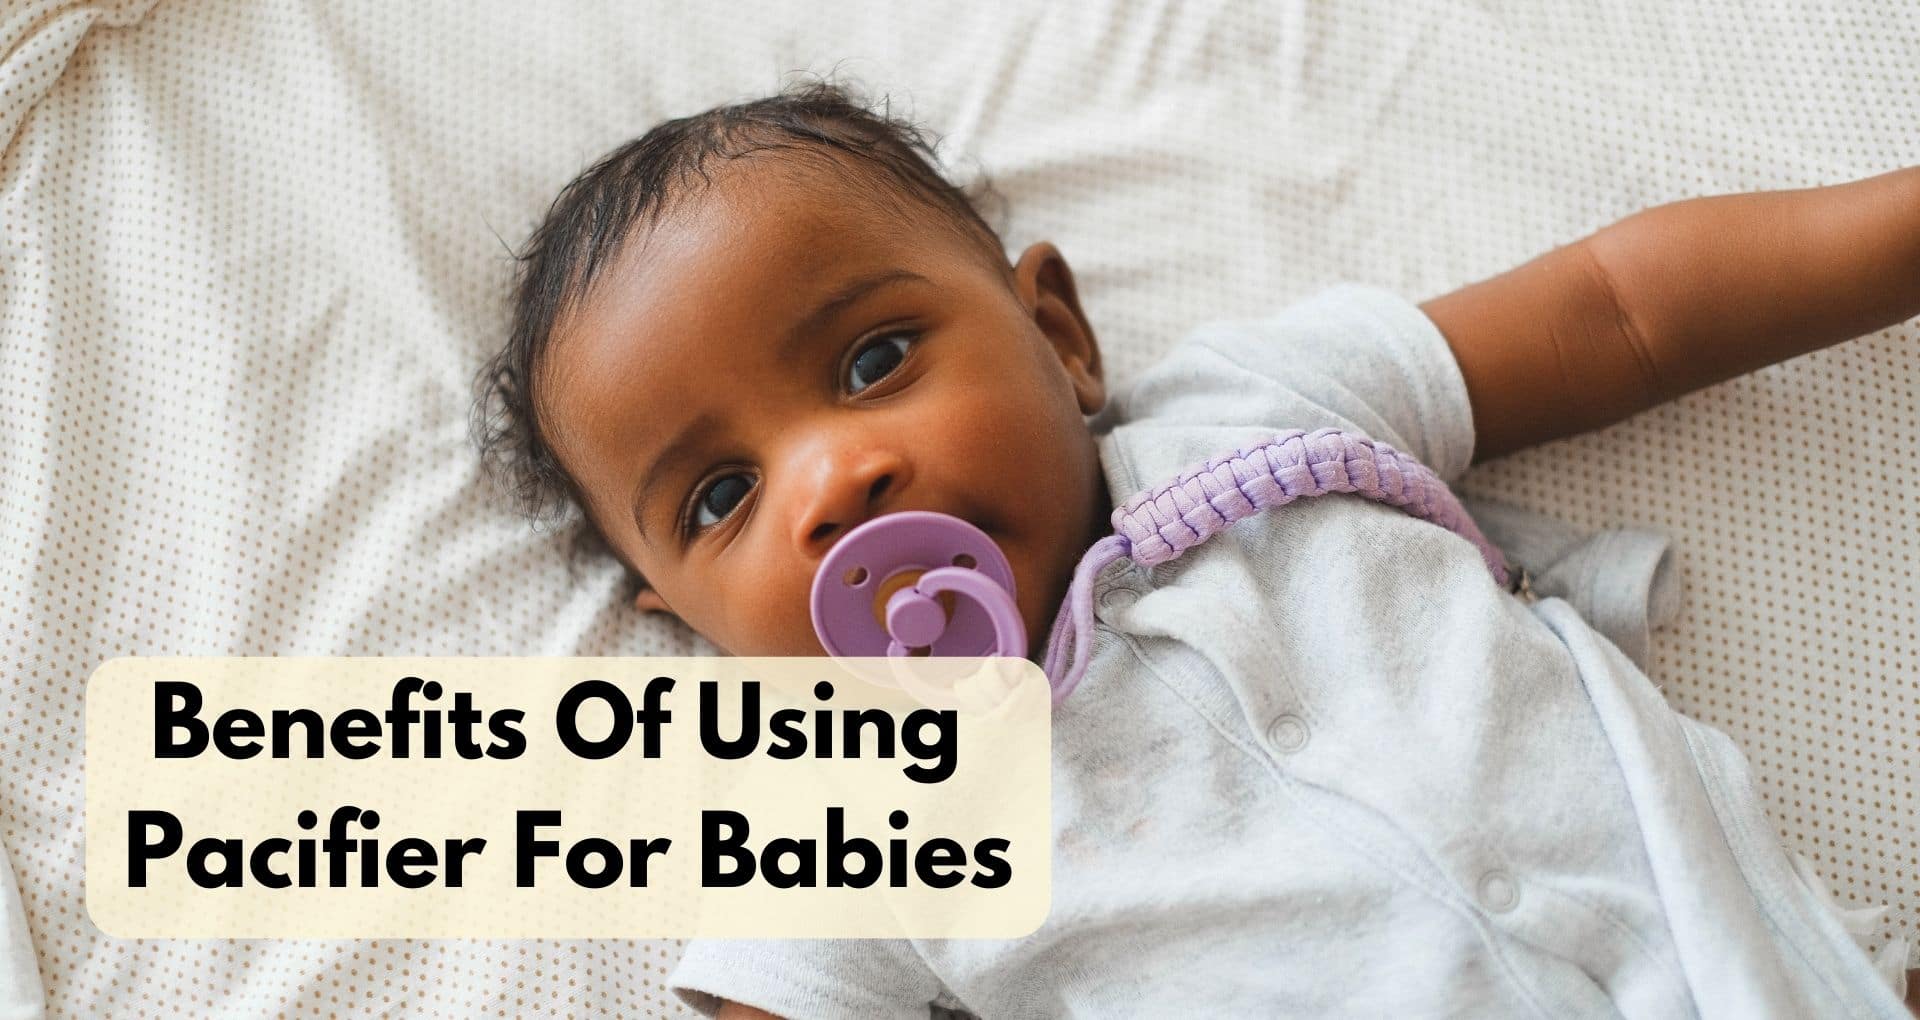 What Are The Benefits Of Using Pacifier For Babies?